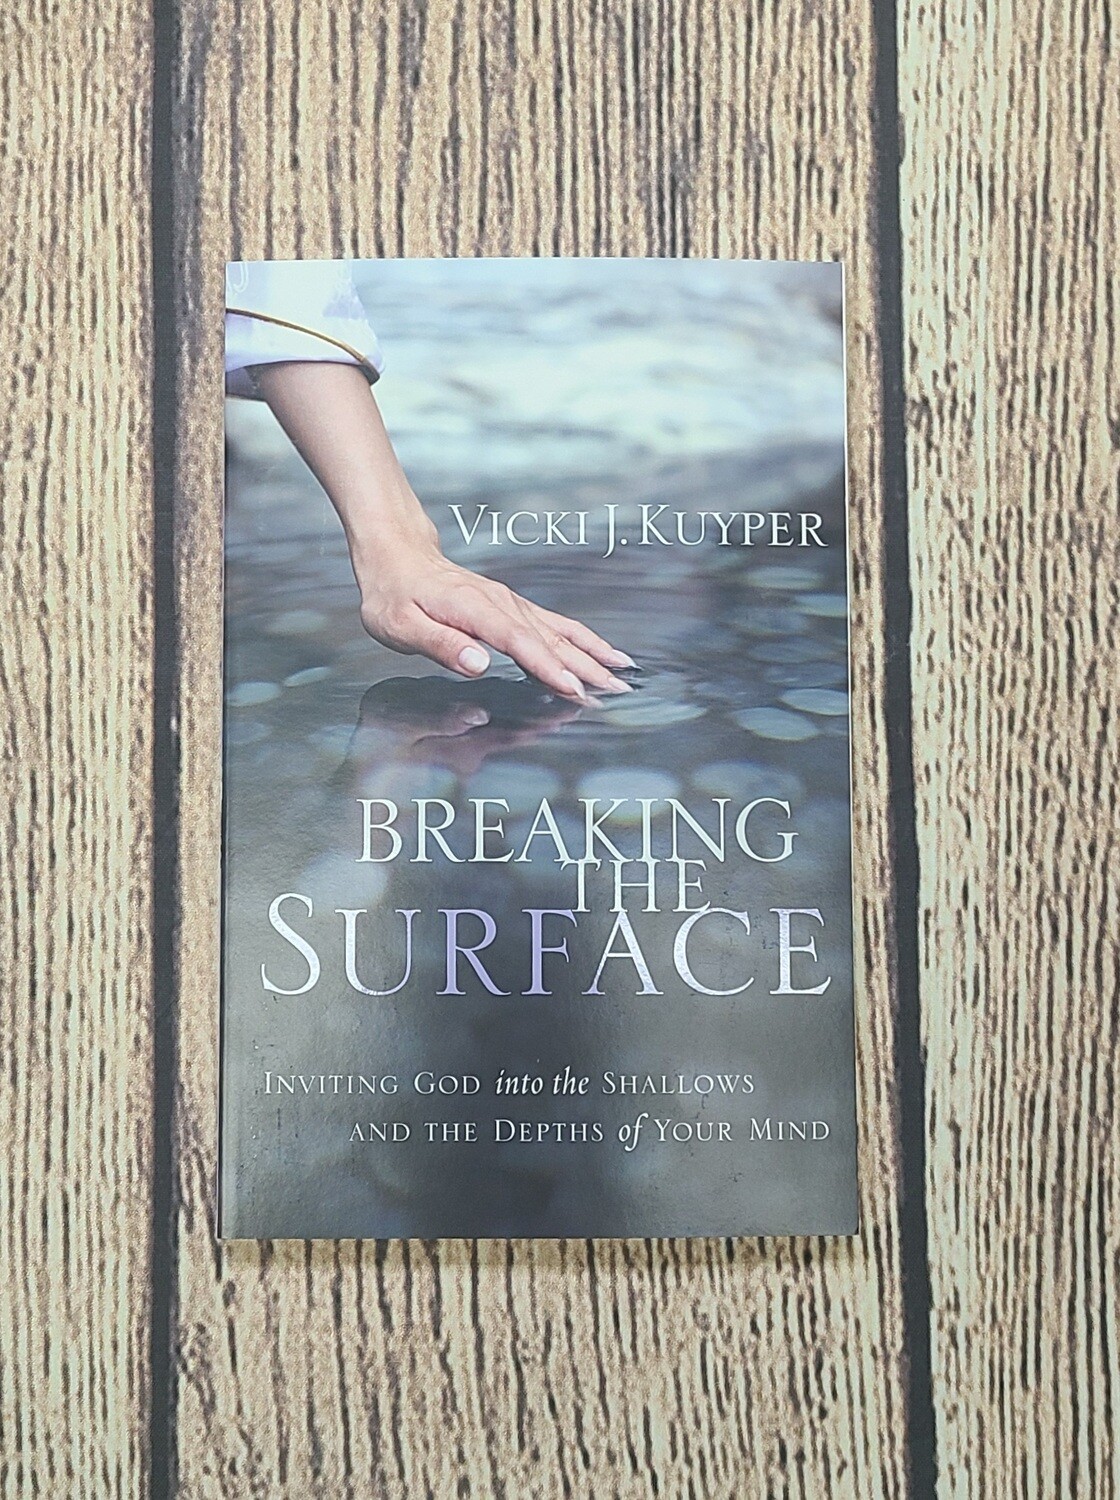 Breaking the Surface: Inviting God into the Shallows and the Depths of Your Mind by Vicki J. Kuyper